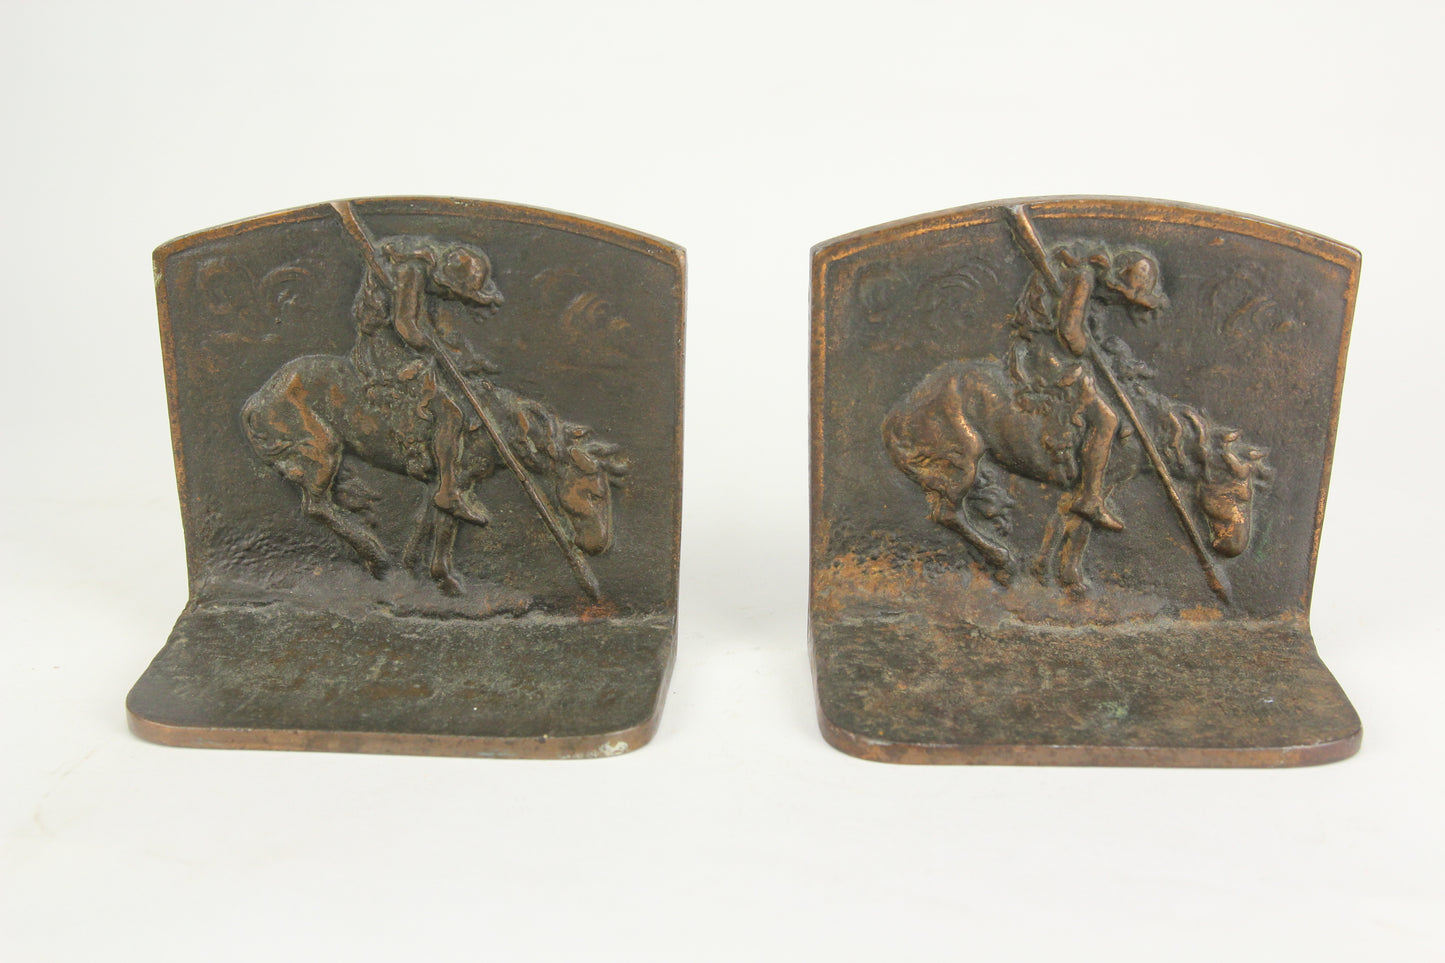 James Earle Fraser's "End of the Trail" Cast Iron Native American Indian Bookends, Pair